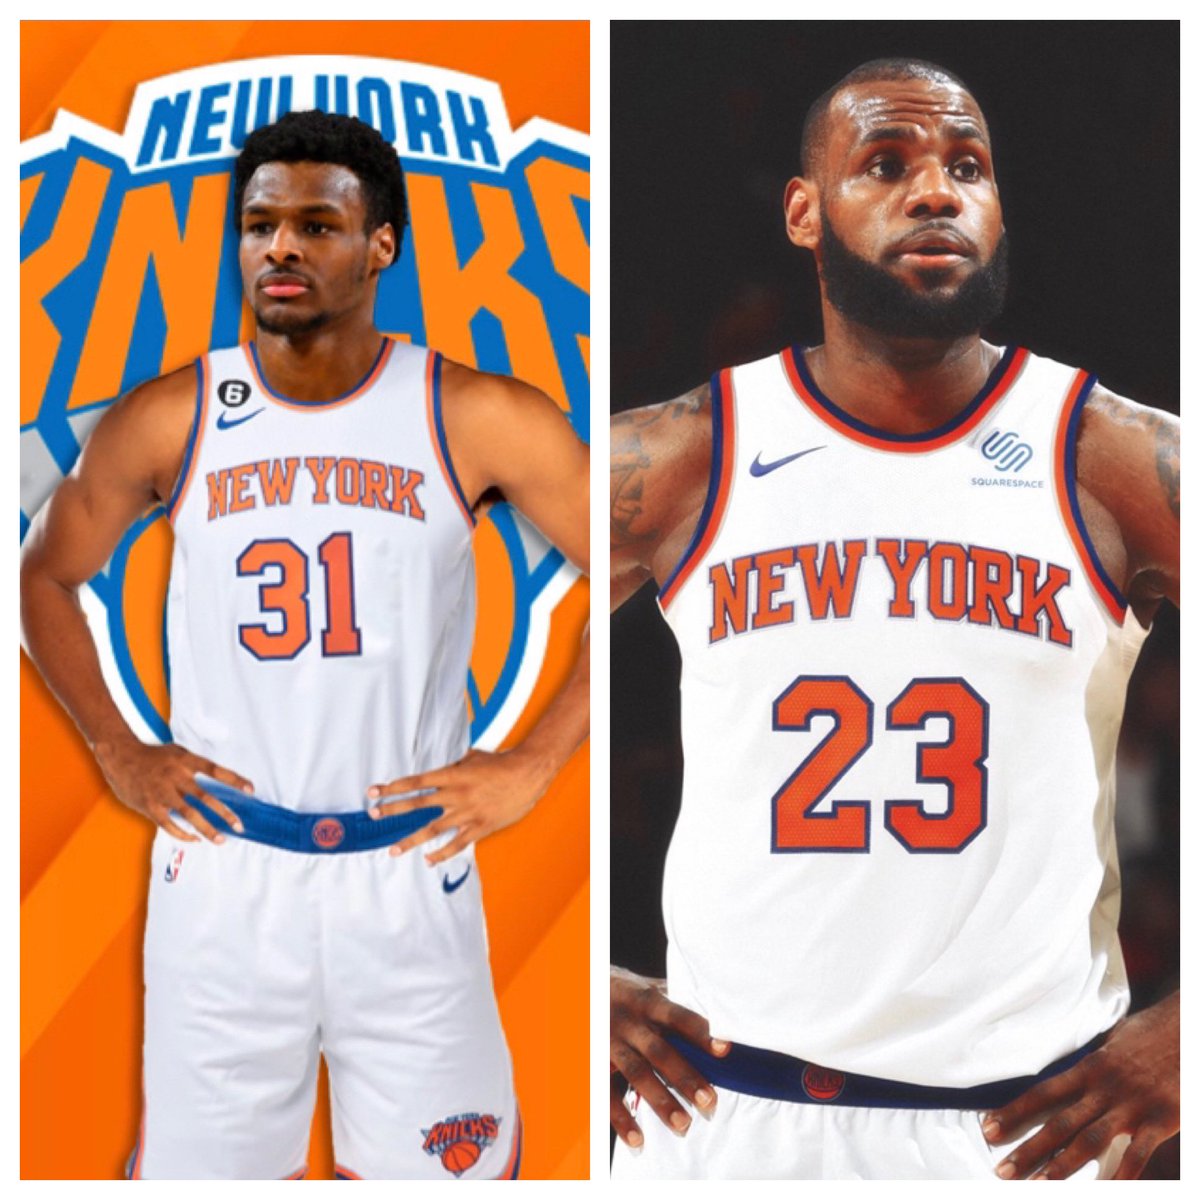 The Knicks draft Bronny James with the 25th overall pick and sign Lebron James to the veterans minimum contract? 
Yes or No?